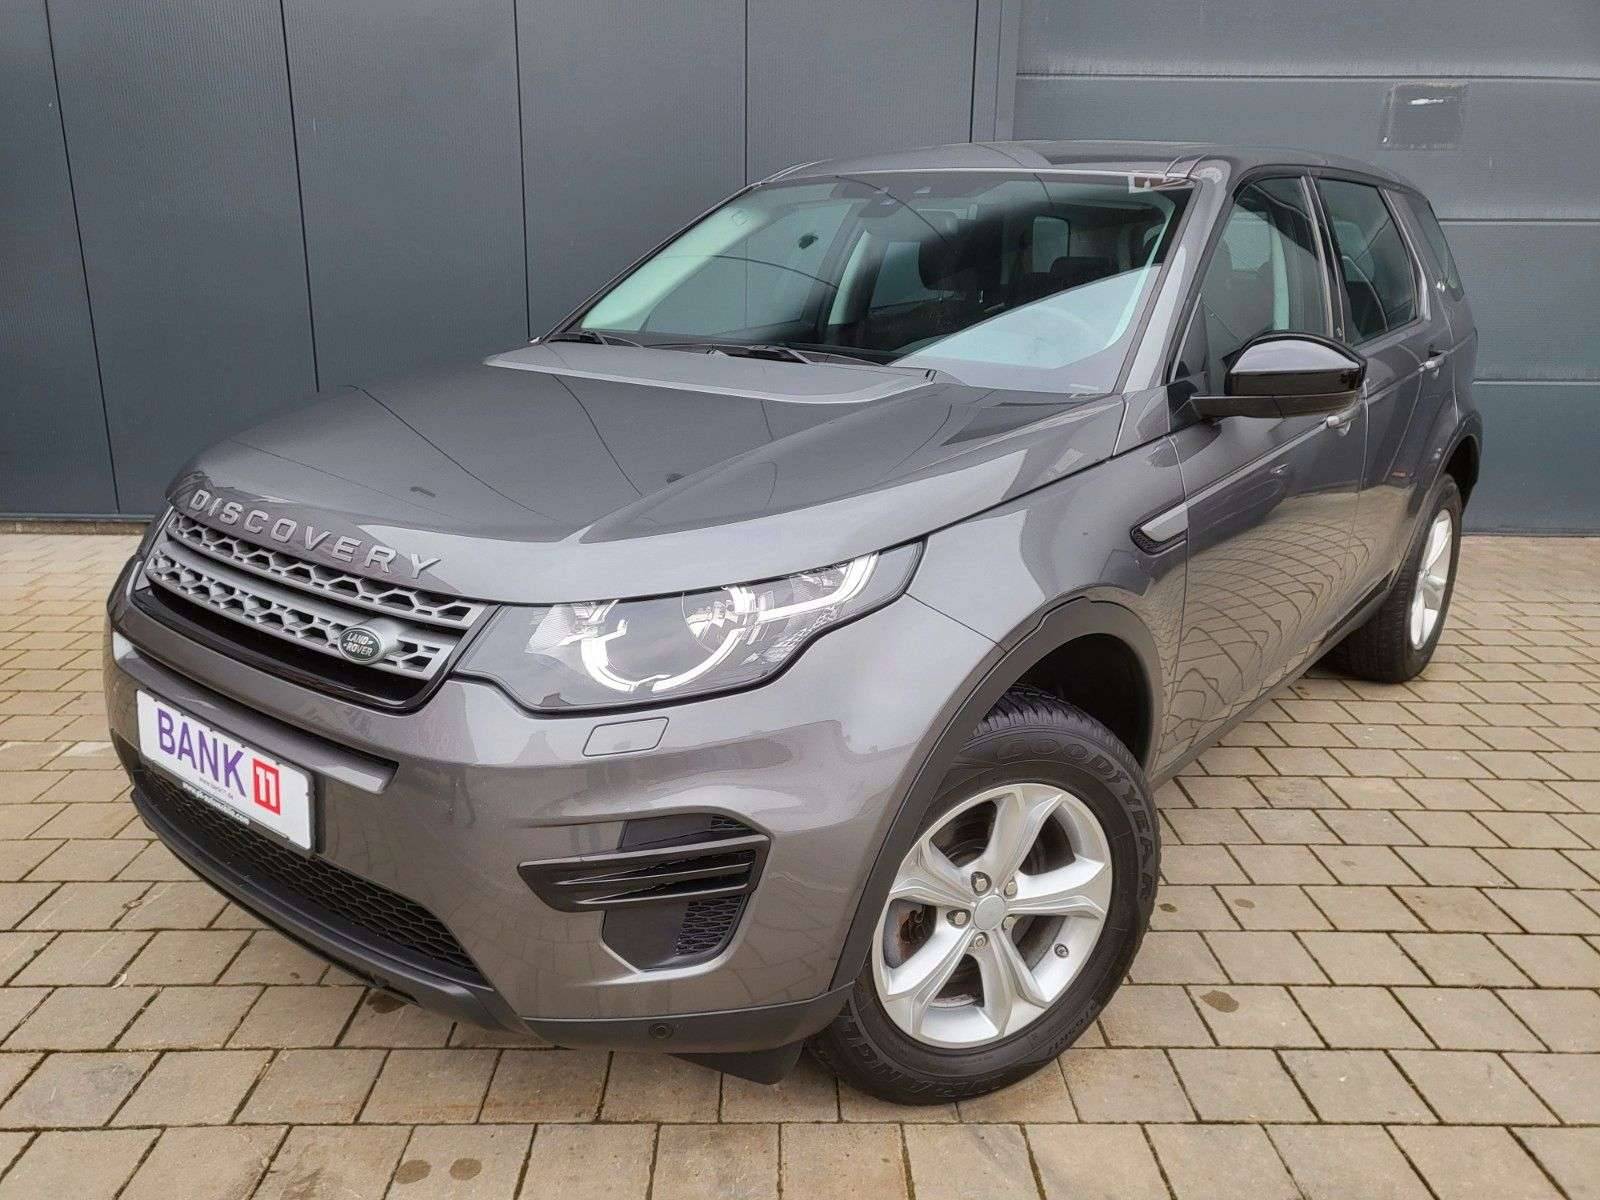 school Armoedig Weggooien For Sale: Land Rover Discovery Sport 2.0 TD4 (2017) offered for £18,922